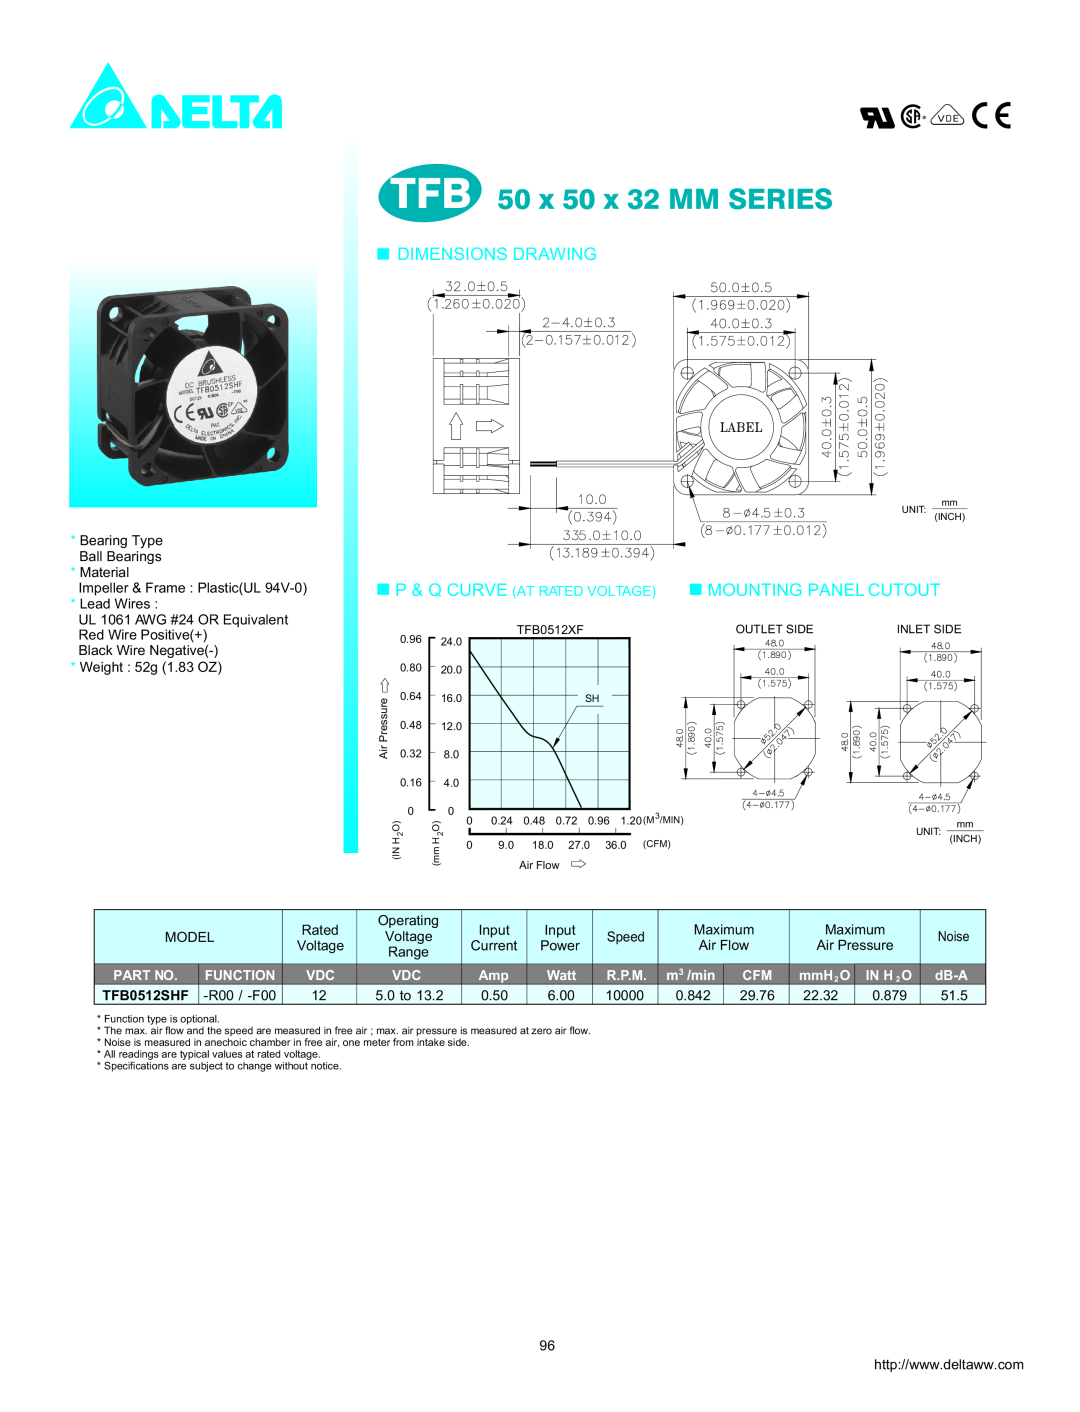 Delta Electronics dimensions TFB 50 x 50 x 32 MM SERIES, Dimensions Drawing, Mounting Panel Cutout, Function, R.P.M 